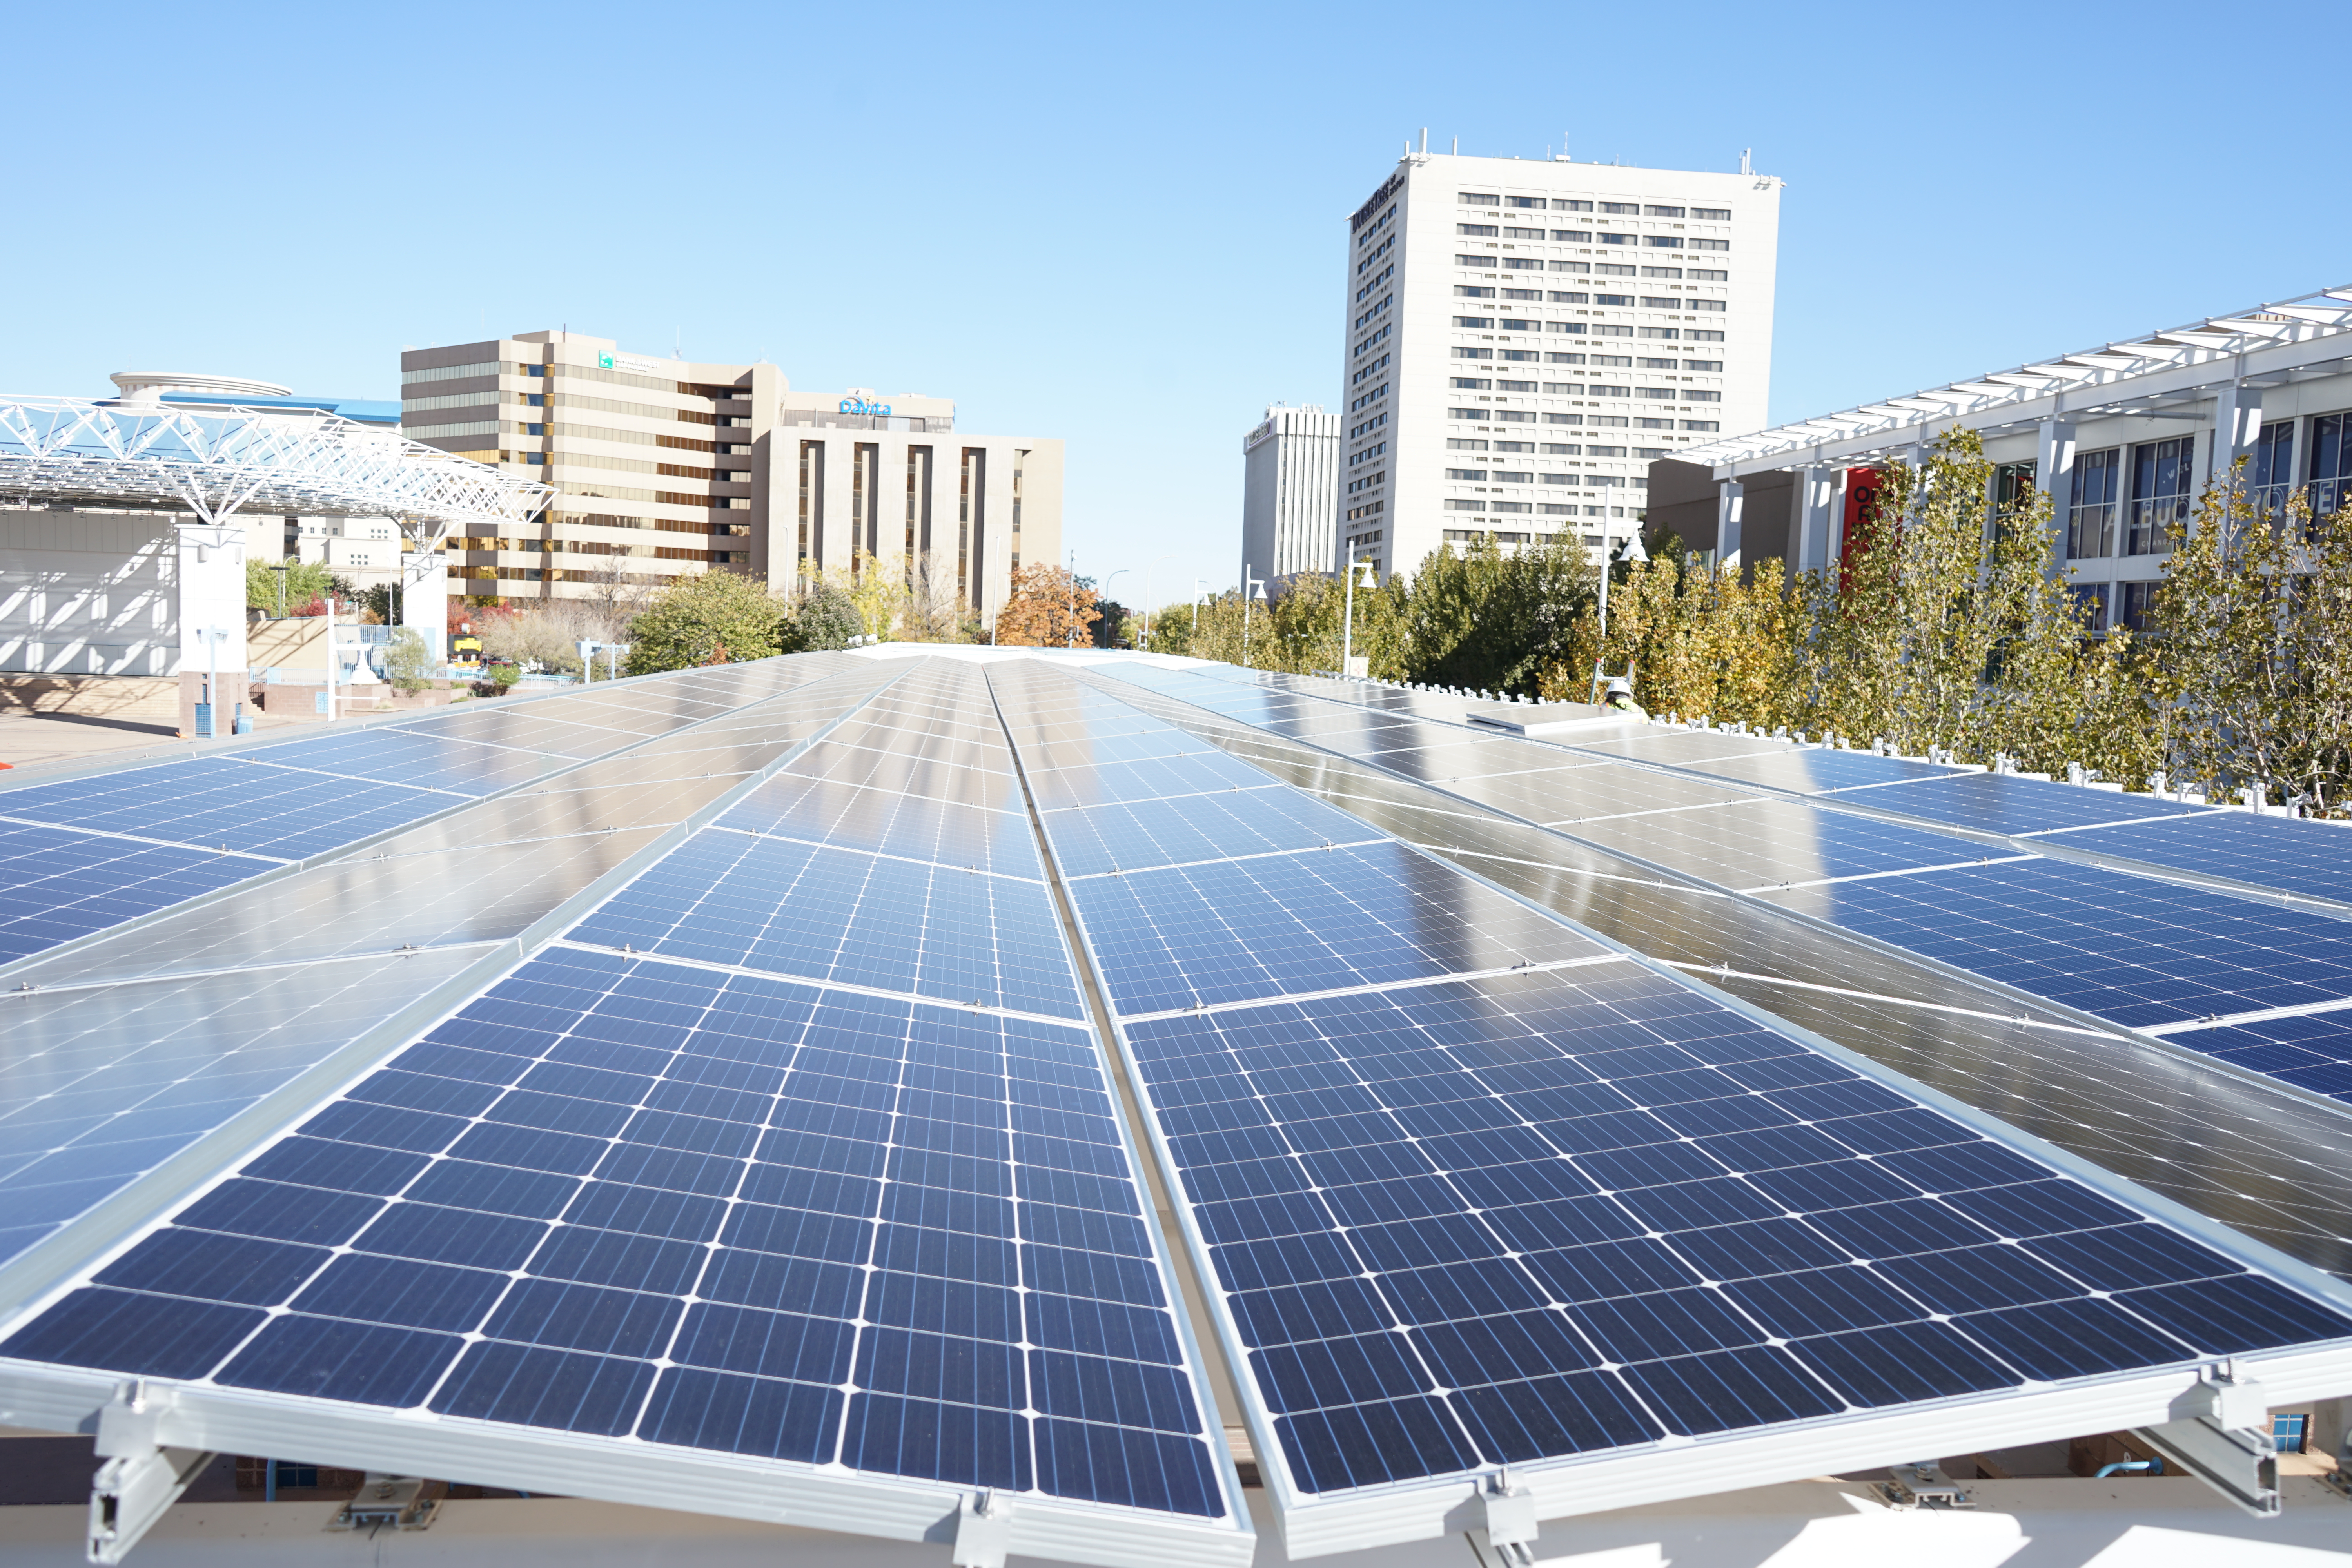 A solar panel array mounted on top of a shade structure on Civic Plaza in Downtown Albuquerque.